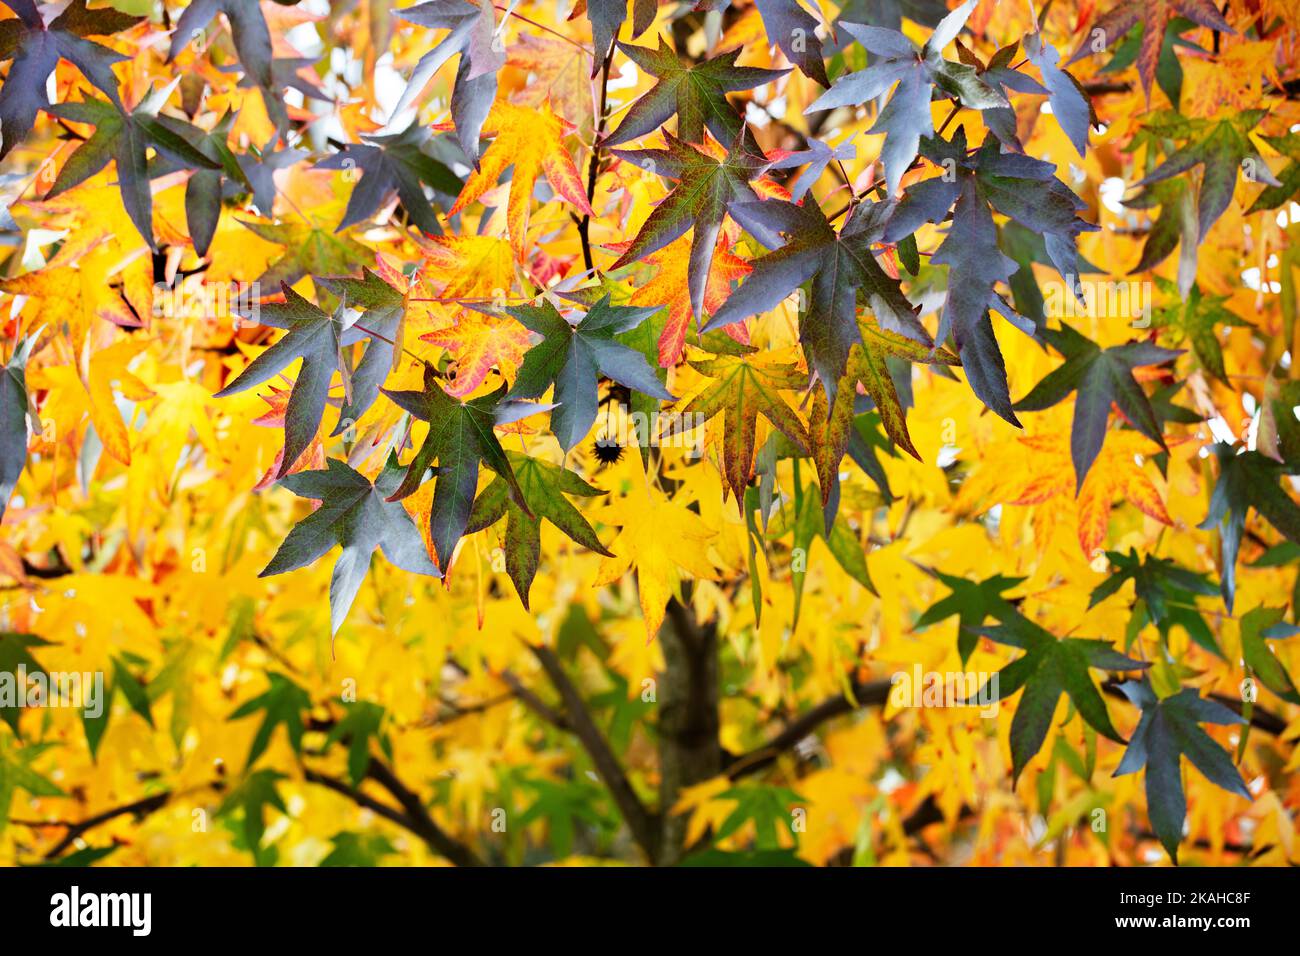 Tree with green and yellow autumn leaves Stock Photo